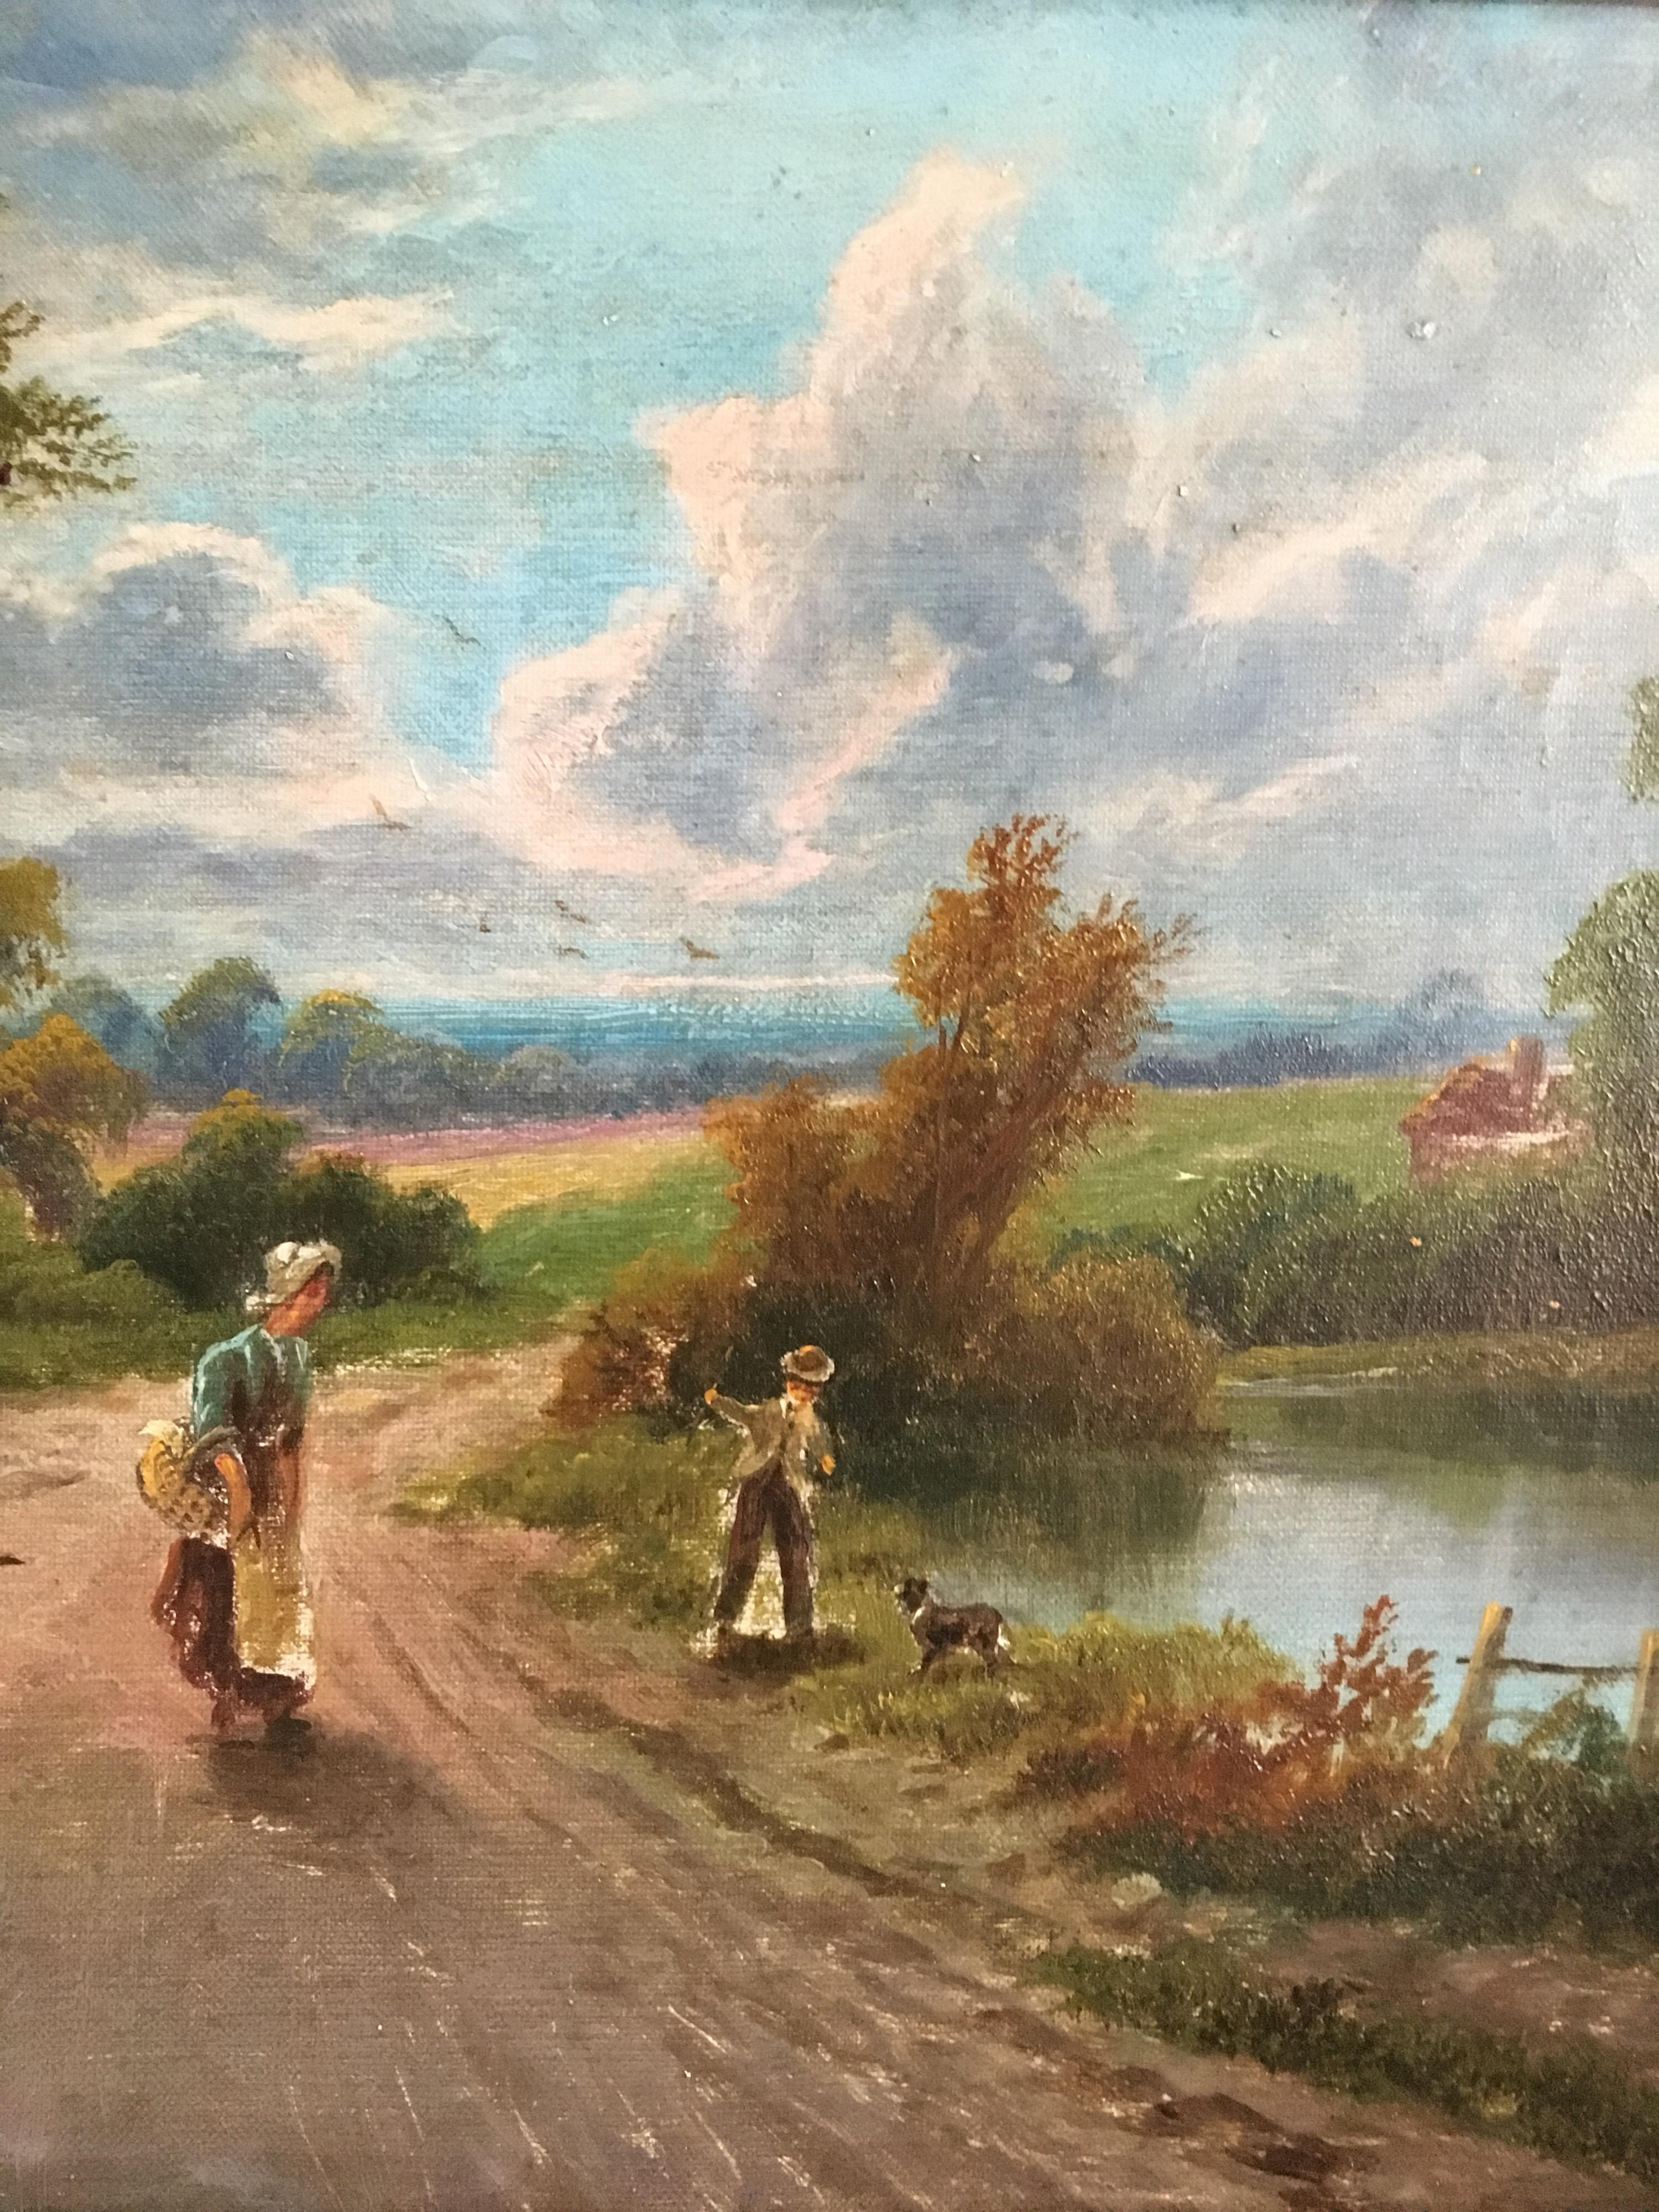 The Rural Road, Countryside Landscape
British School, circa 1900
Oil painting on canvas, framed
Frame size: 20 x 25 inches

Exquisite antique oil painting, depicting an old rural lane with a family pushing their cart and walking the dog.  The road